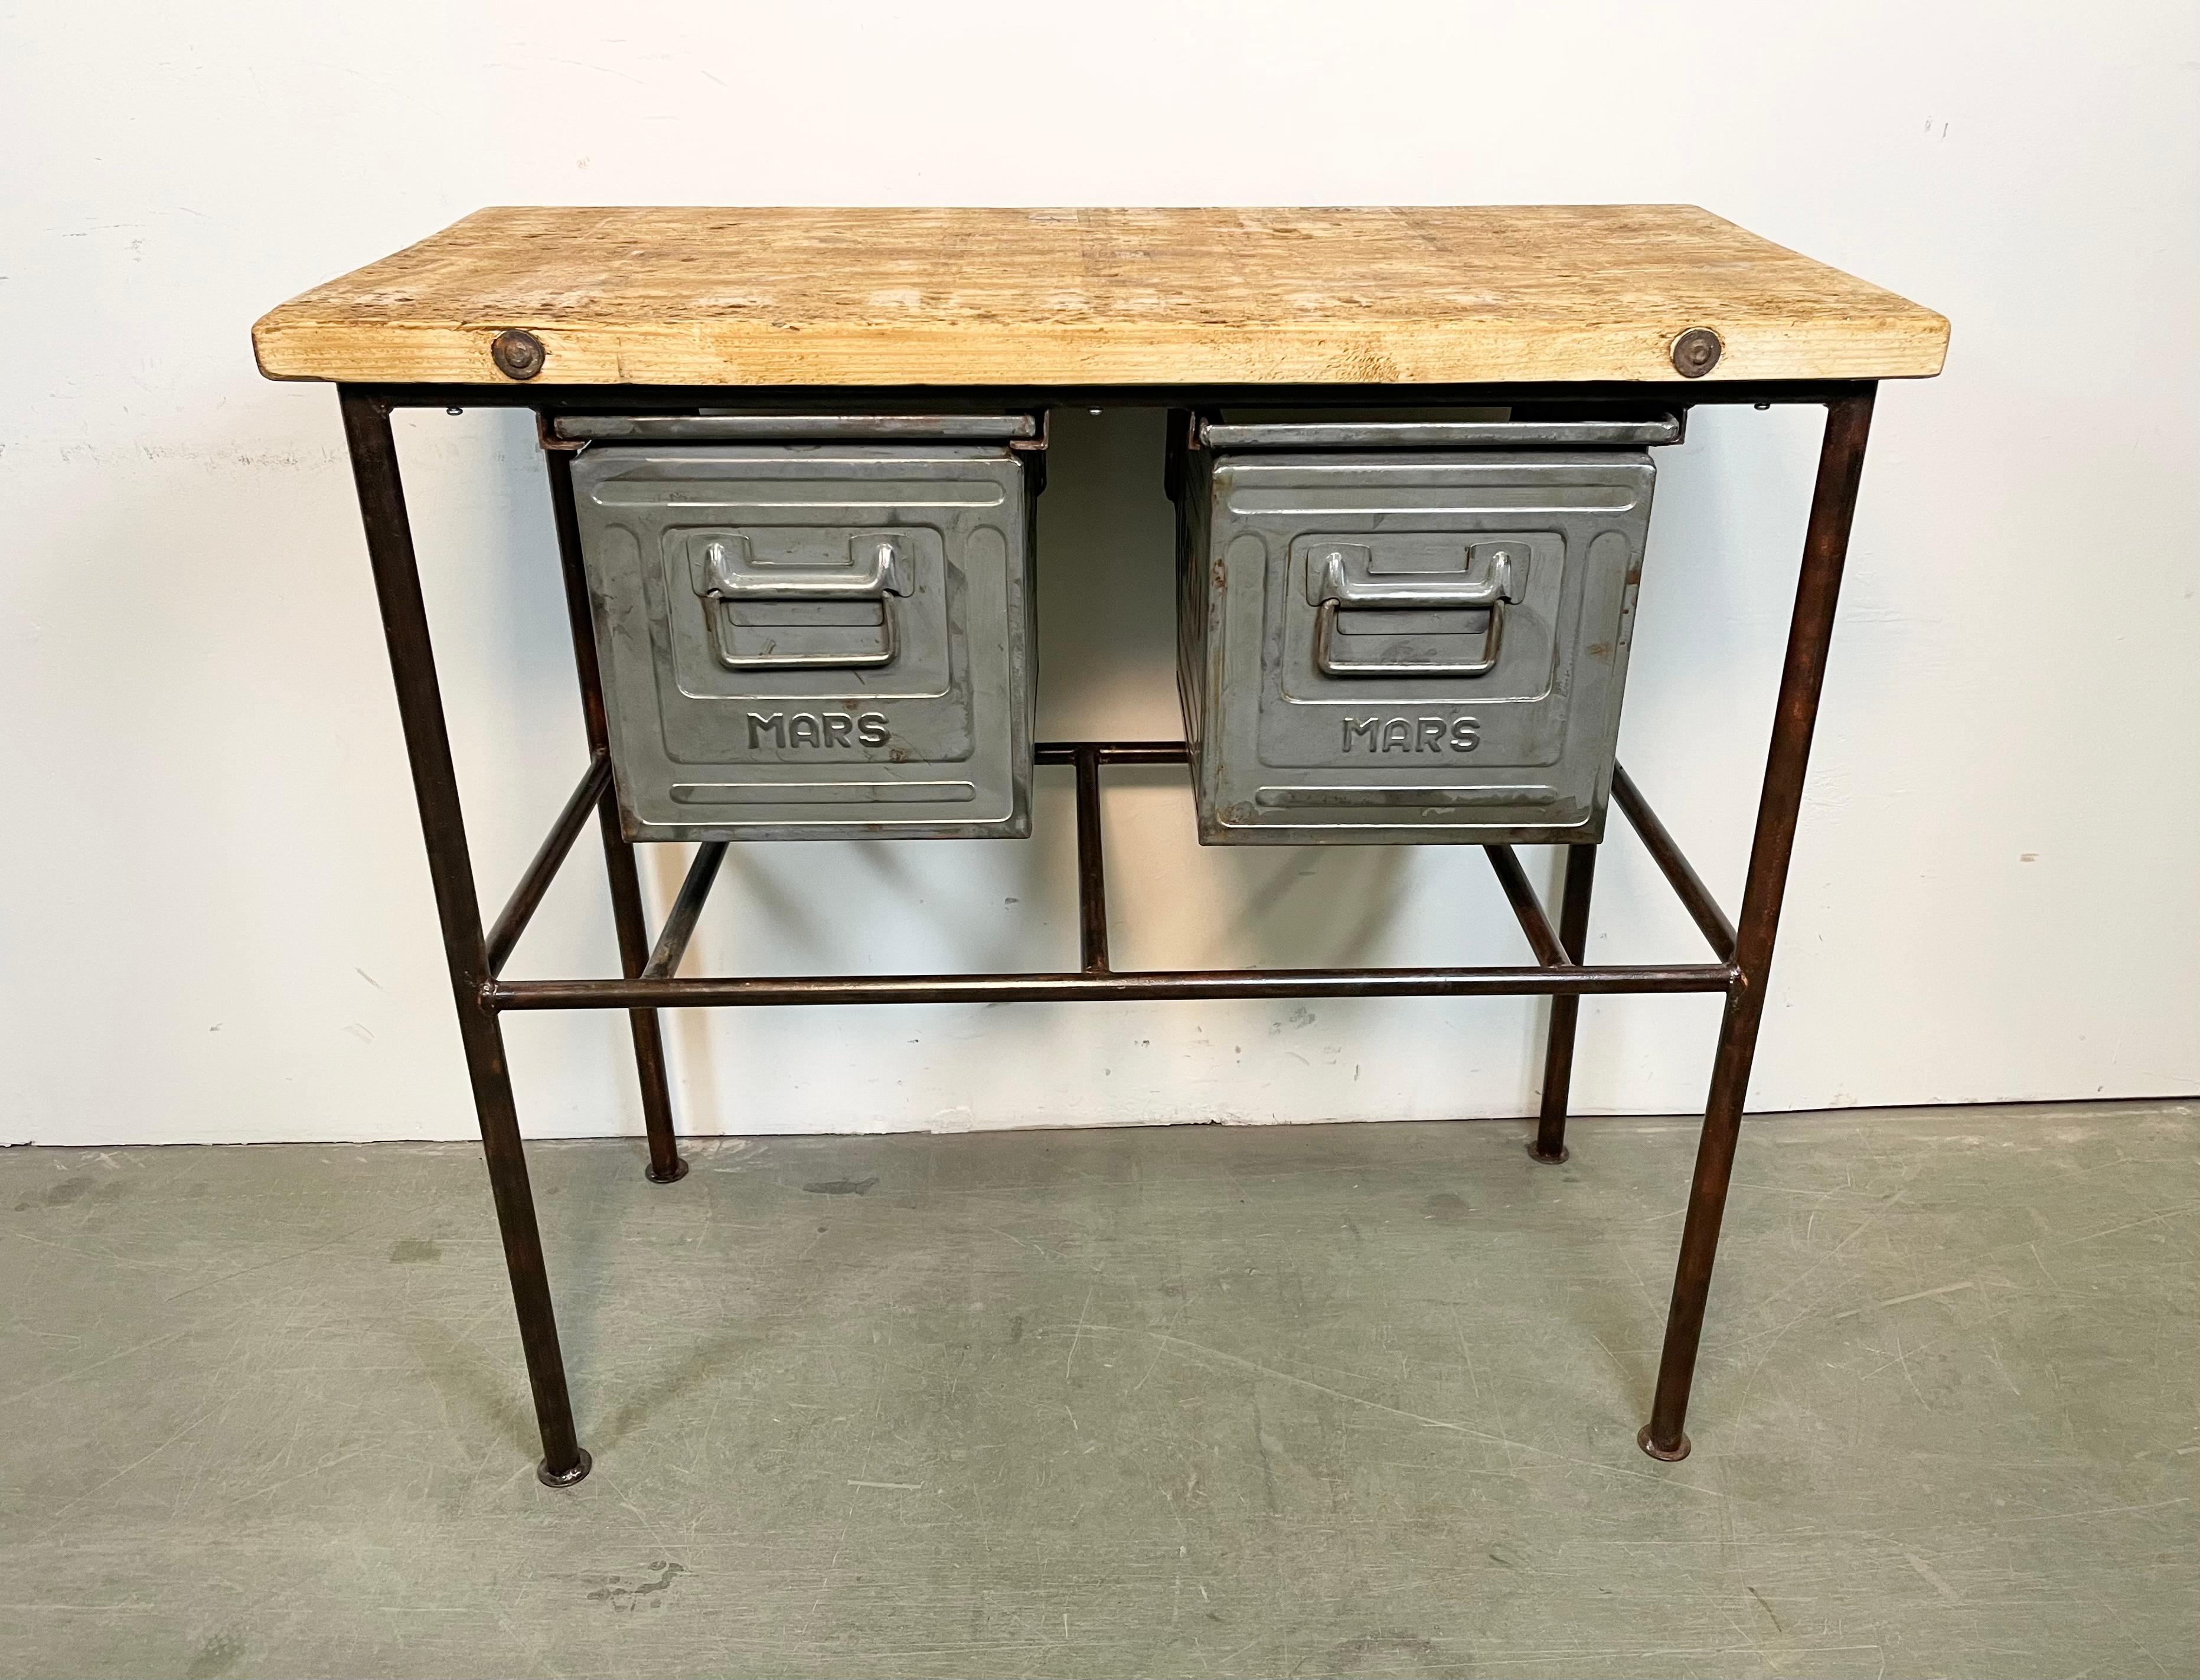 Vintage industrial worktable from the 1960s. It features a red- brown iron construction, solid wooden plate and two grey iron drawers. Weight: 33 kg.